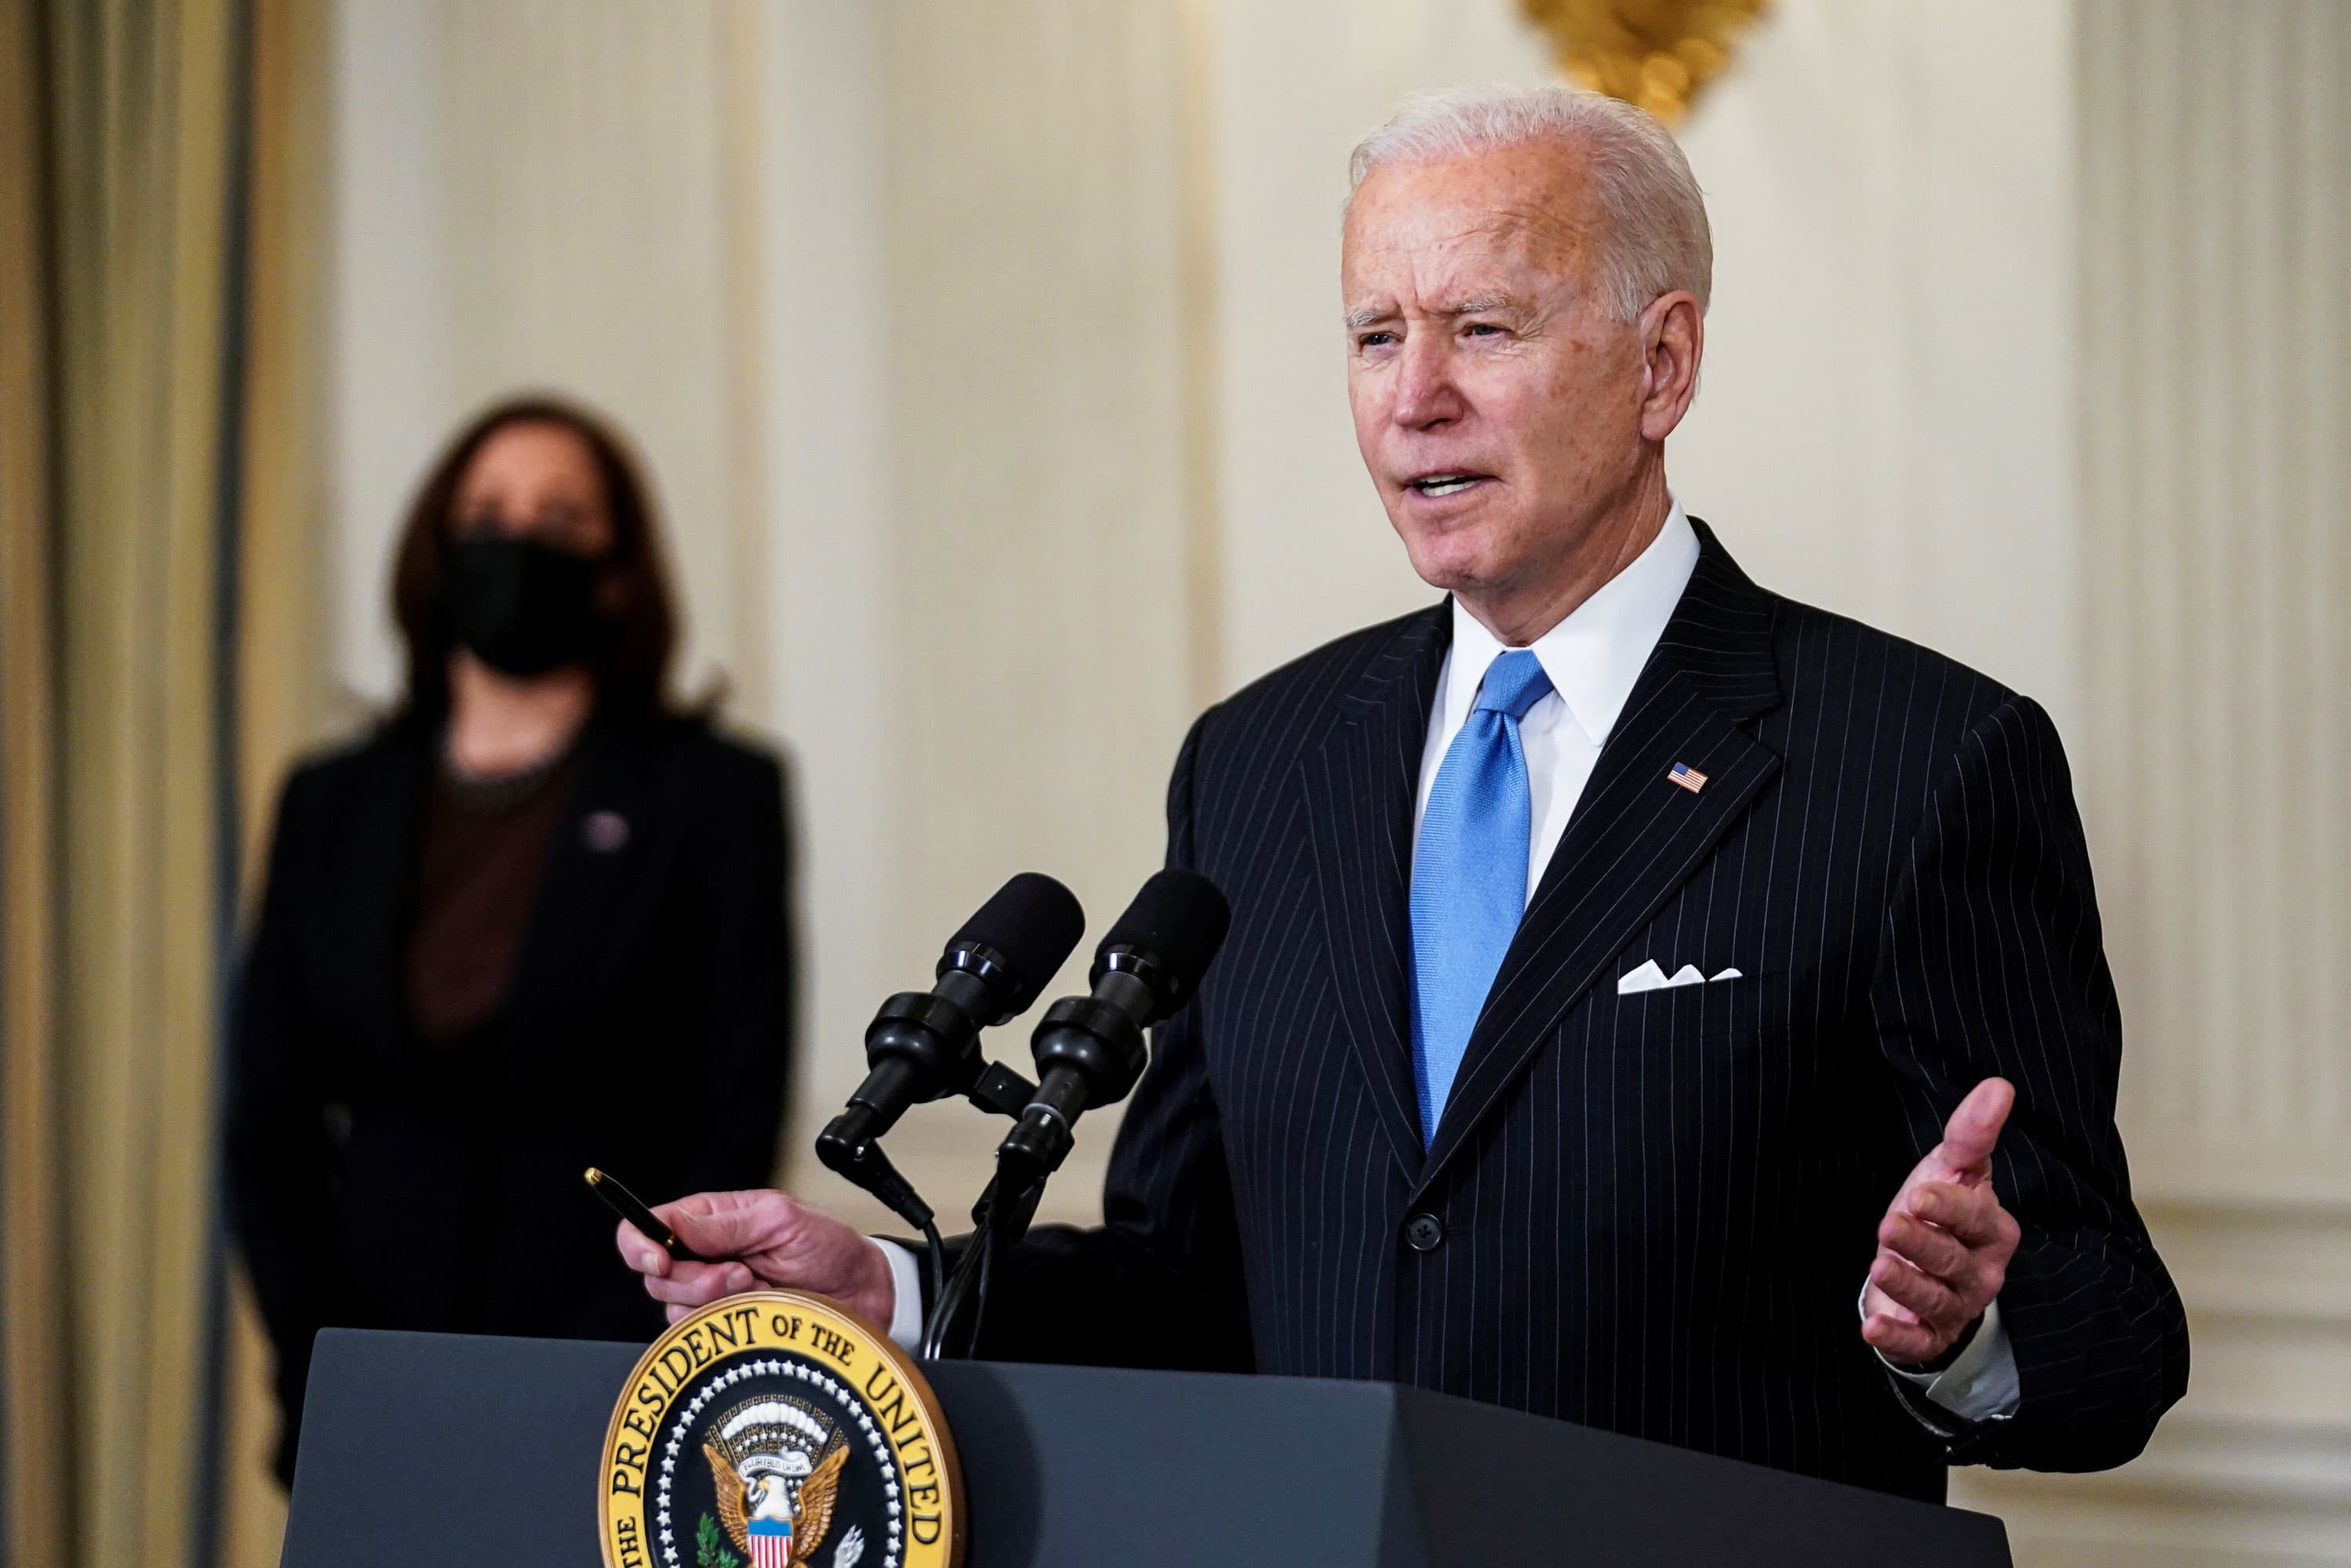 Biden is open to negotiations on raising corporate taxes, but says the US should act with confidence on infrastructure